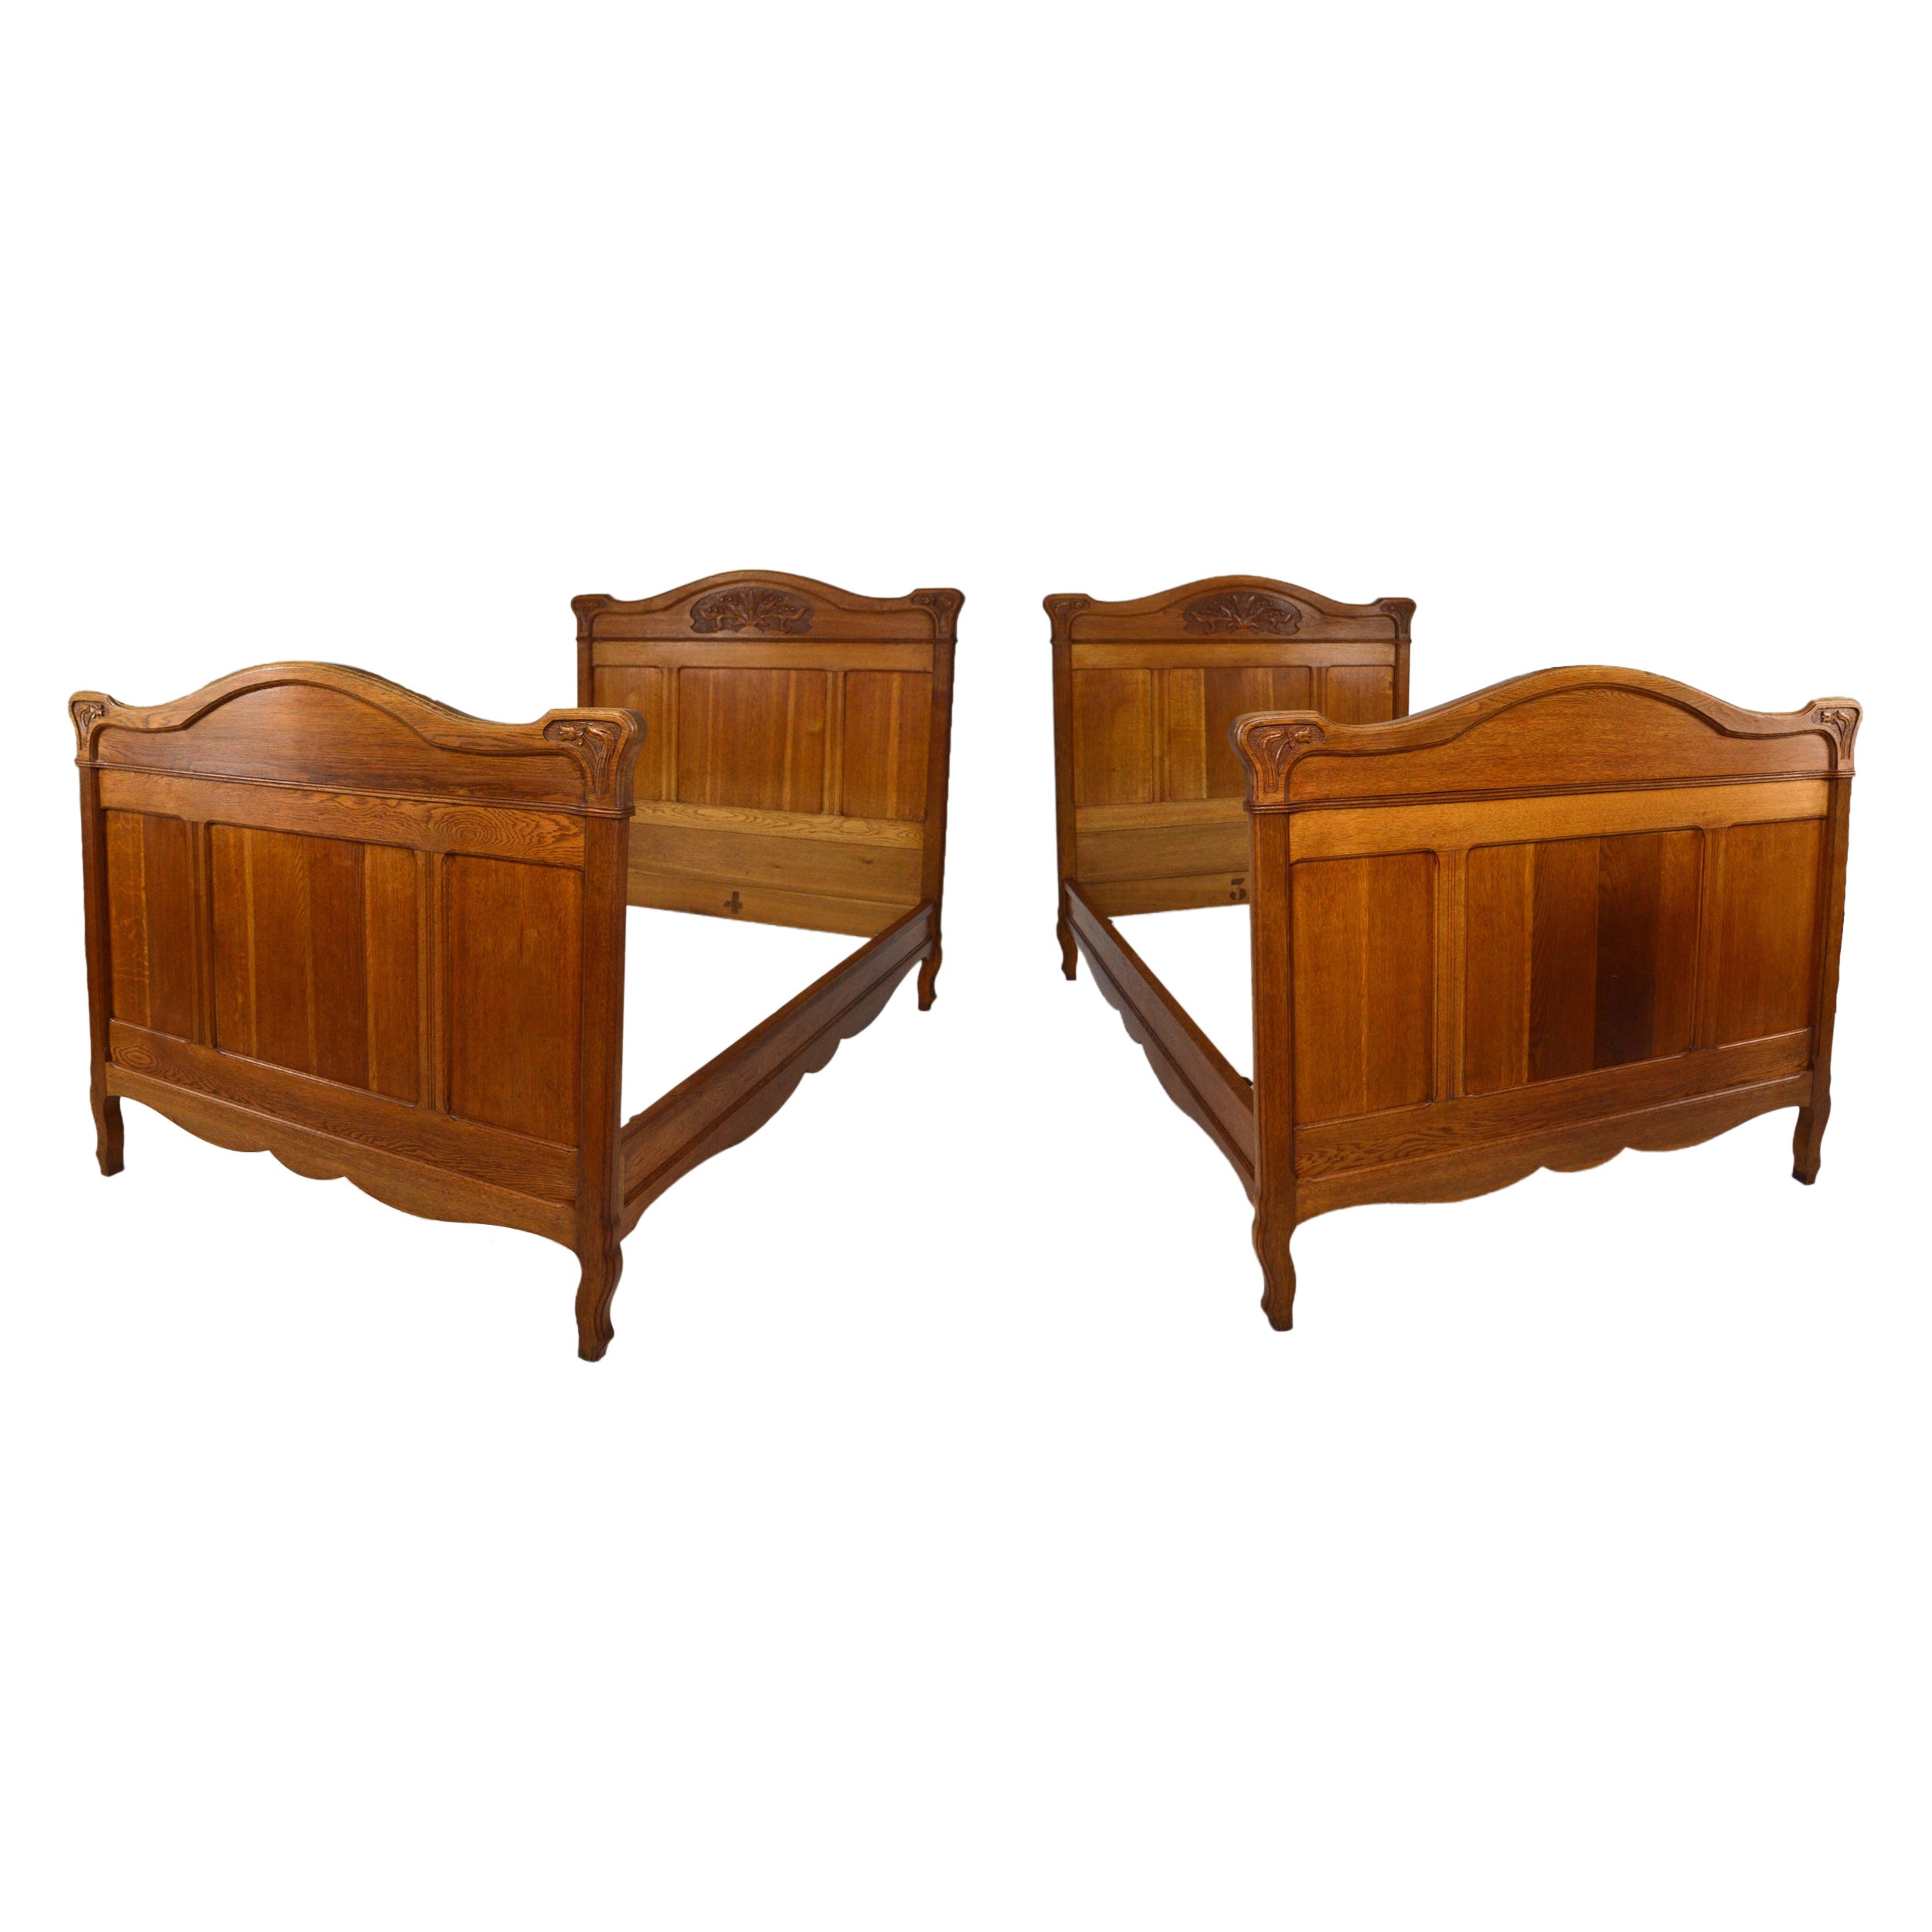 Art Nouveau Twin Beds in Carved Oak, France, circa 1910 For Sale